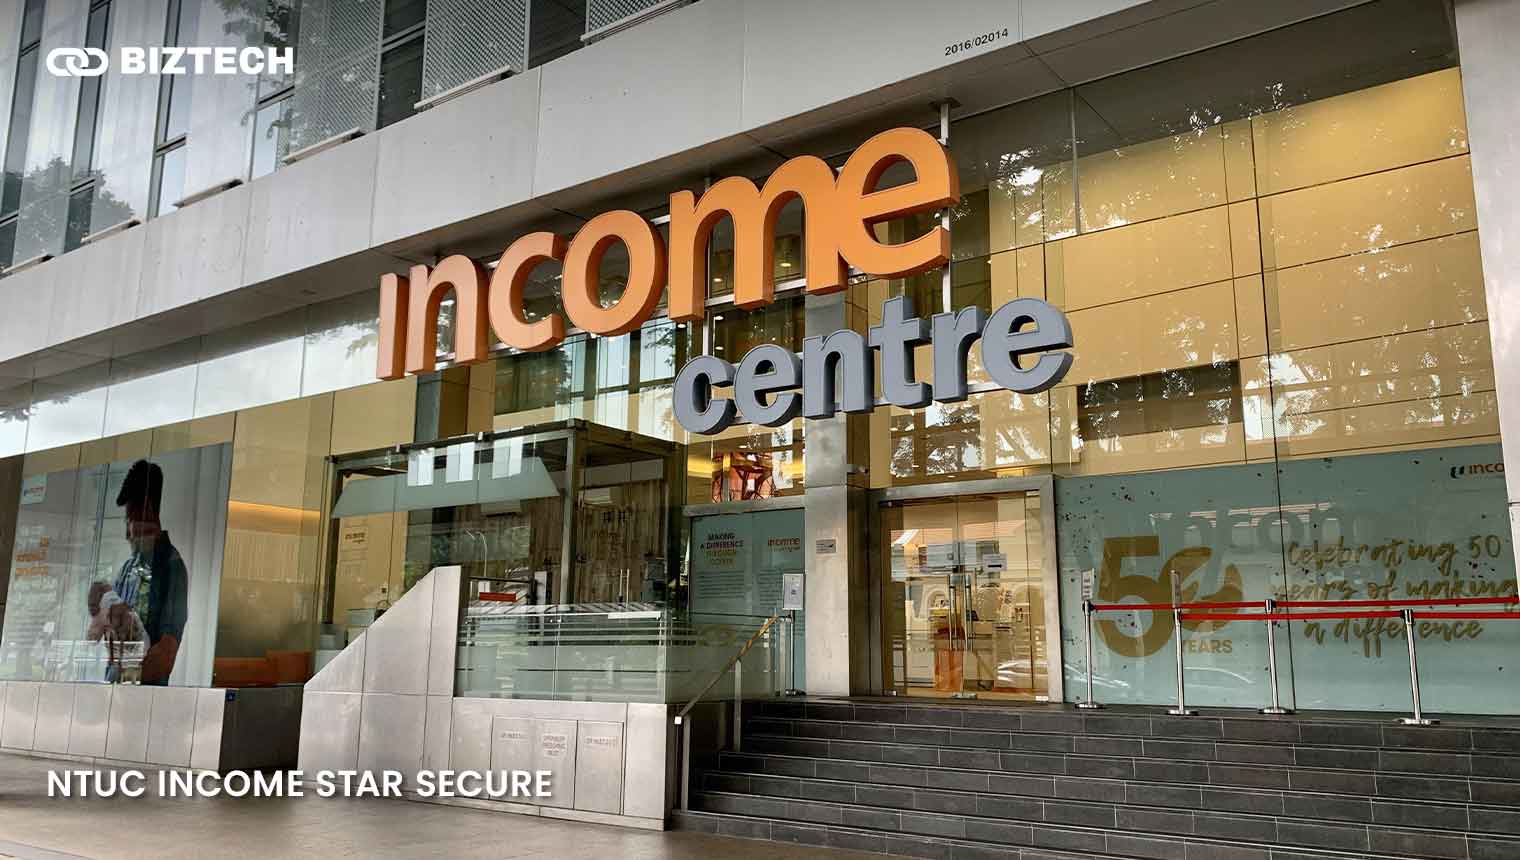 NTUC Income Star Secure